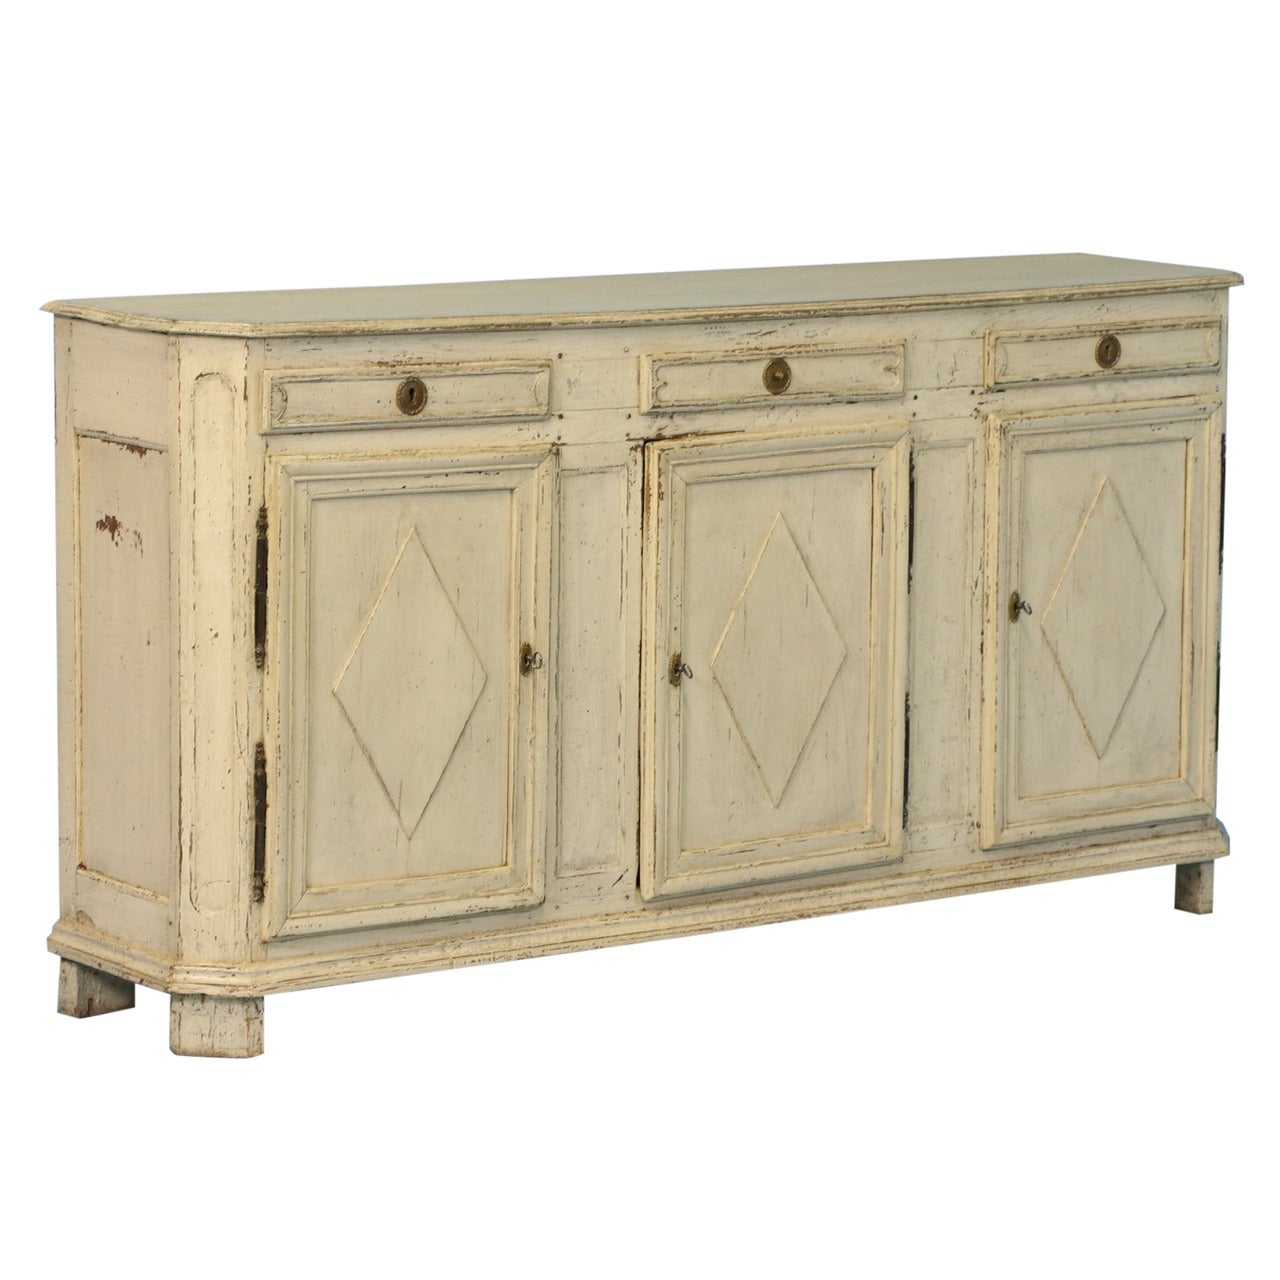 Antique Swedish Gustavian White Painted Sideboard